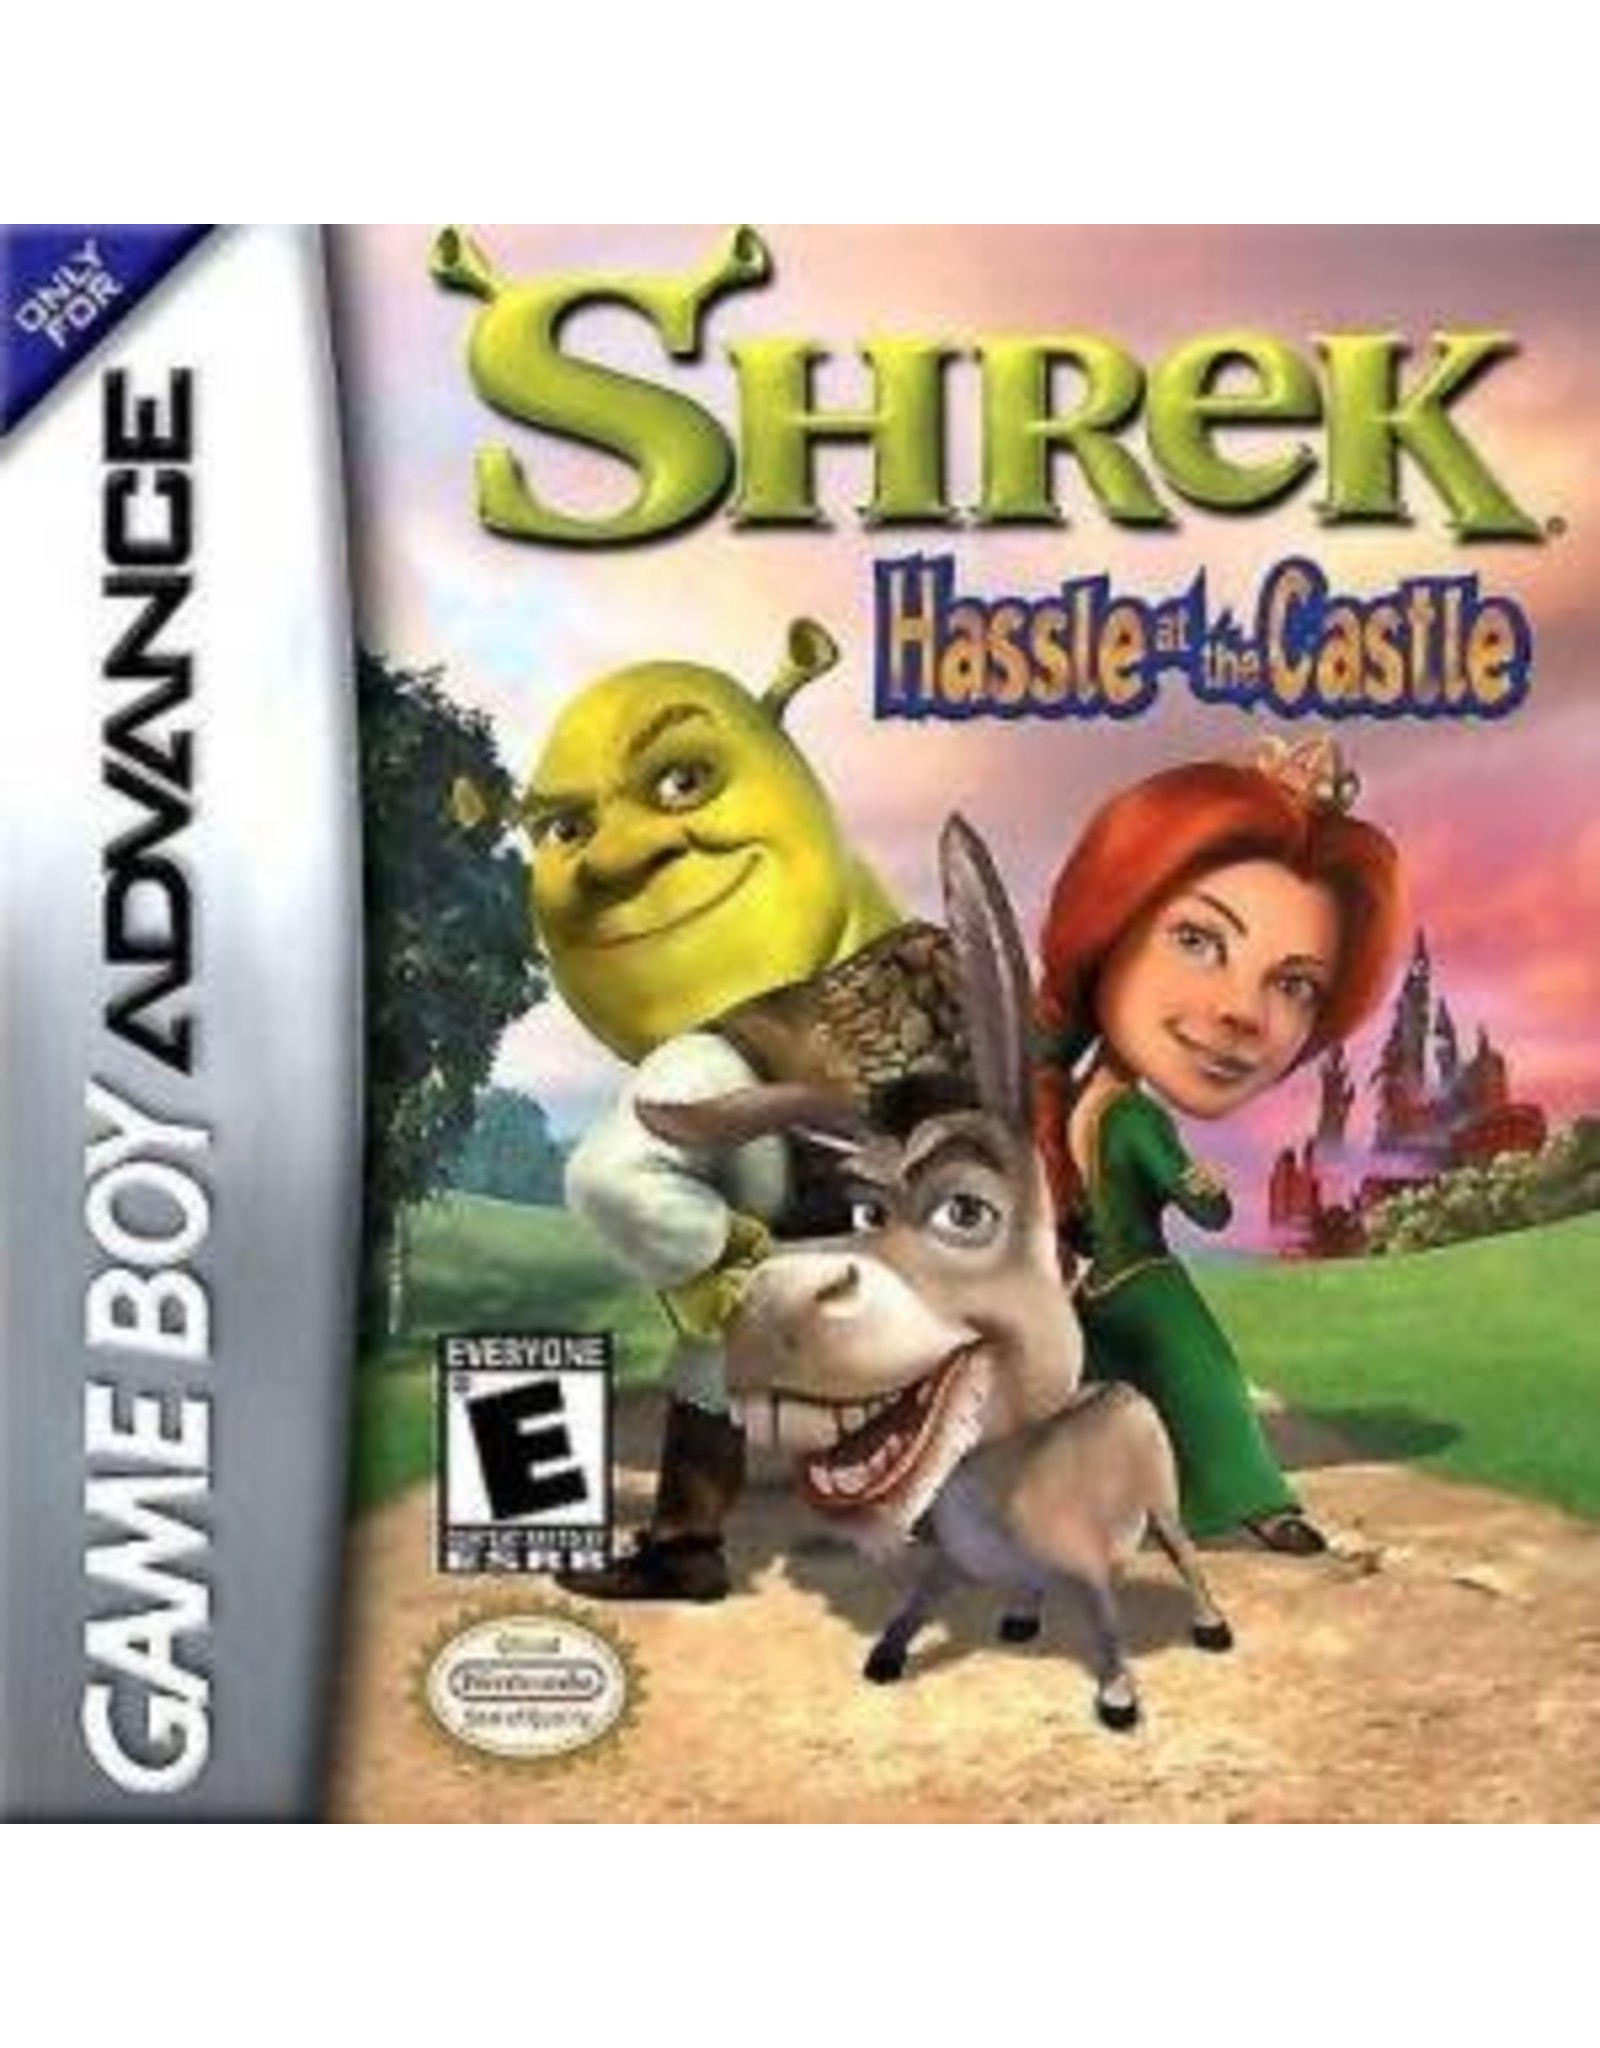 Game Boy Advance Shrek Hassle in the Castle (Cart Only)